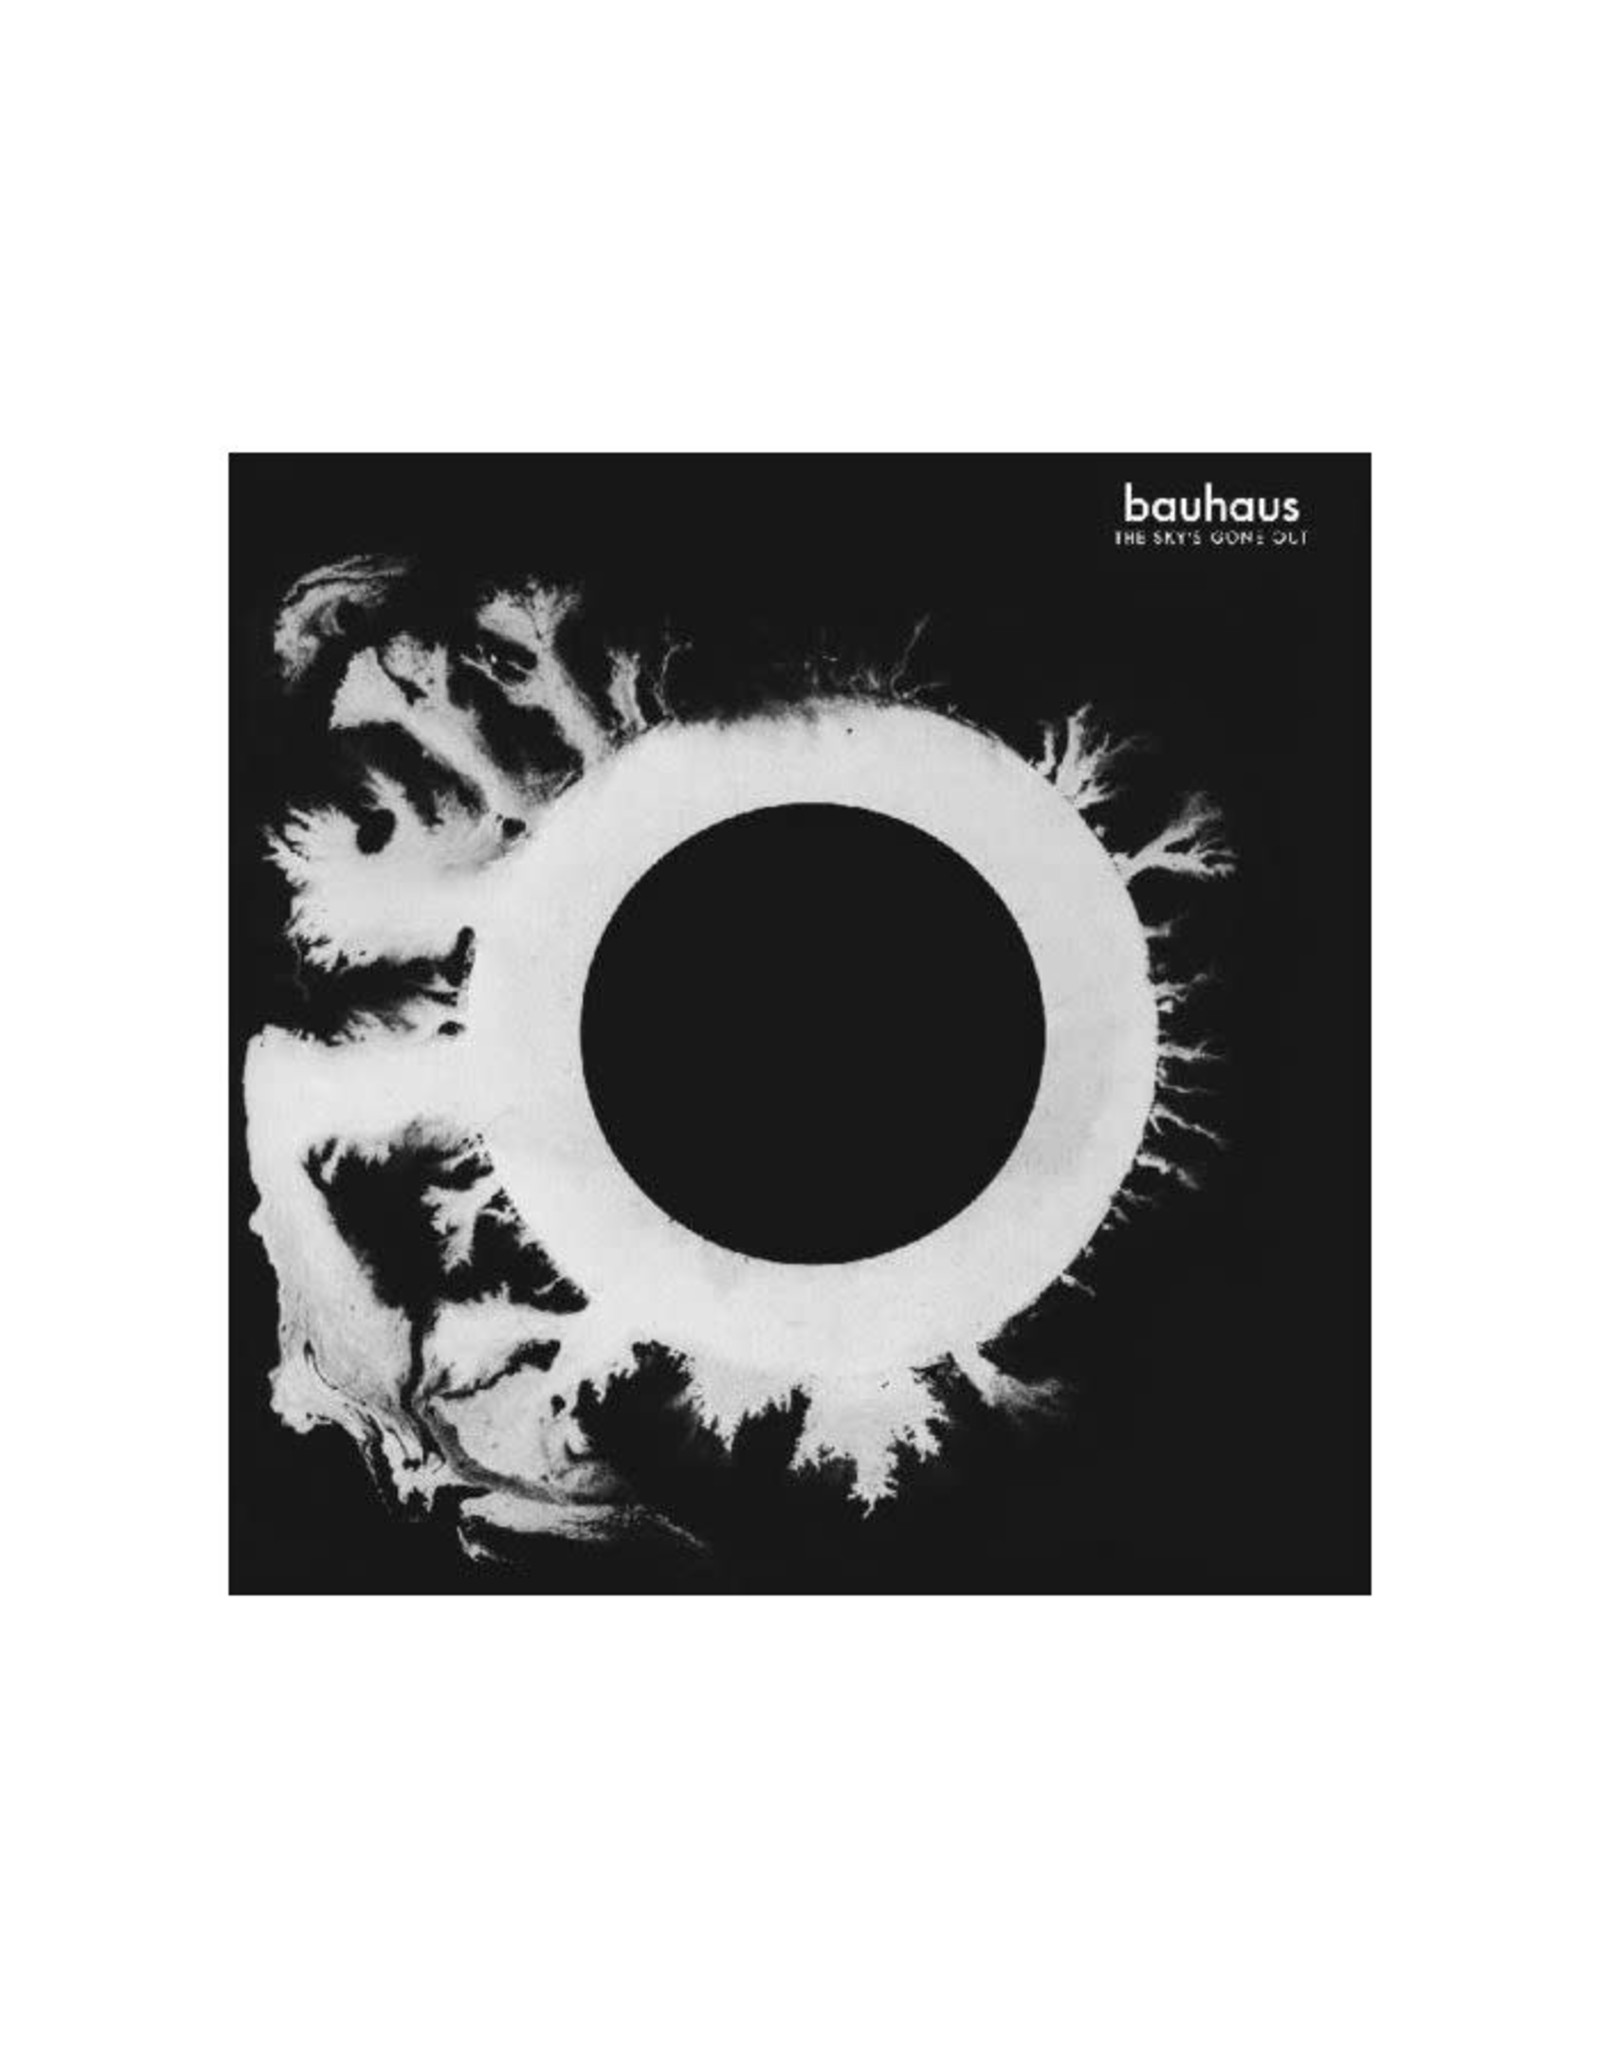 bauhaus - The Sky's Gone Out